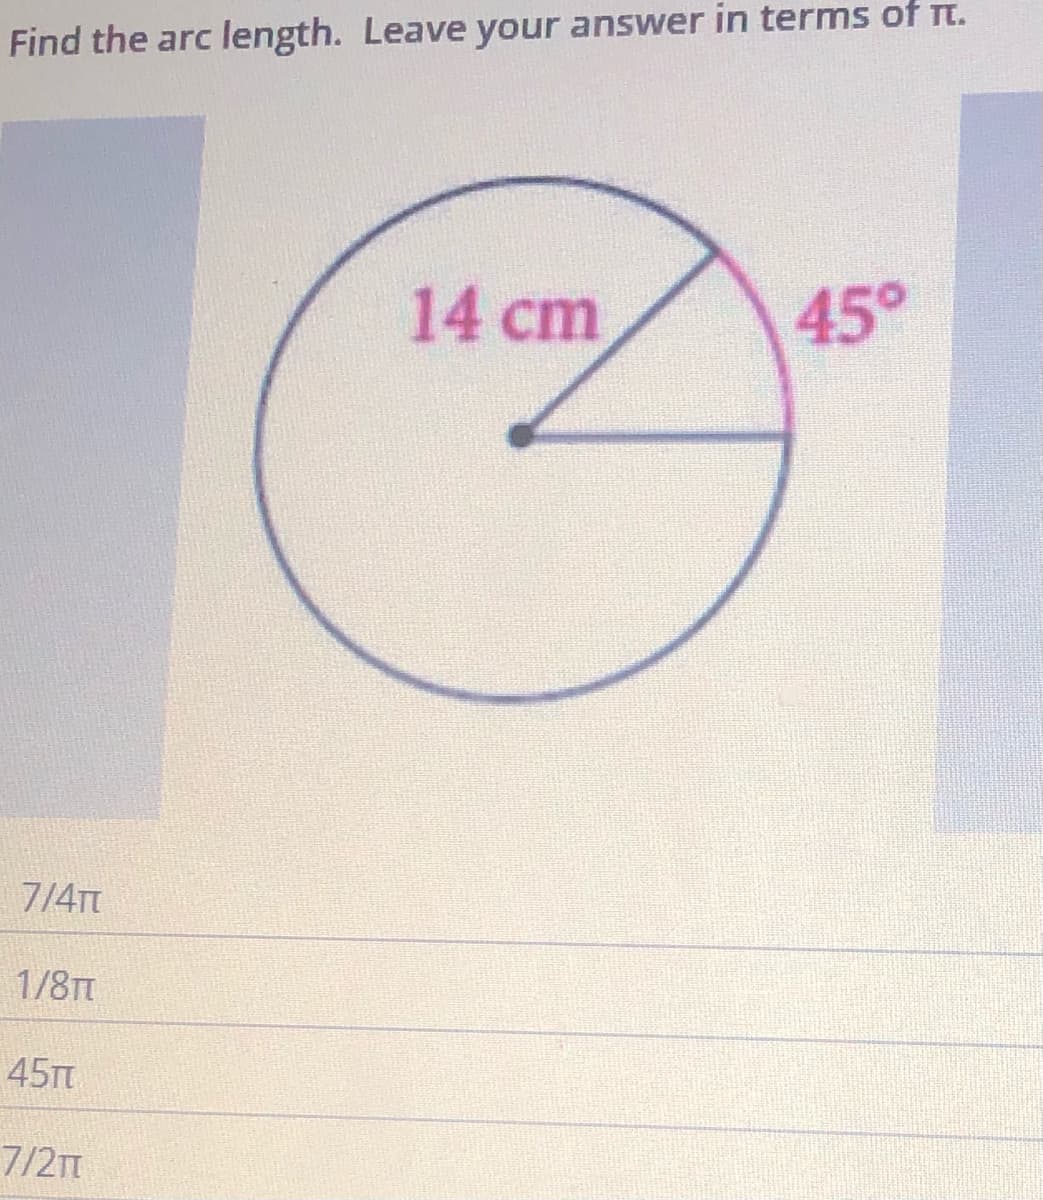 Find the arc length. Leave your answer in terms of t.
14 cm
45°
7/4Tt
1/8TT
45T
7/2m
